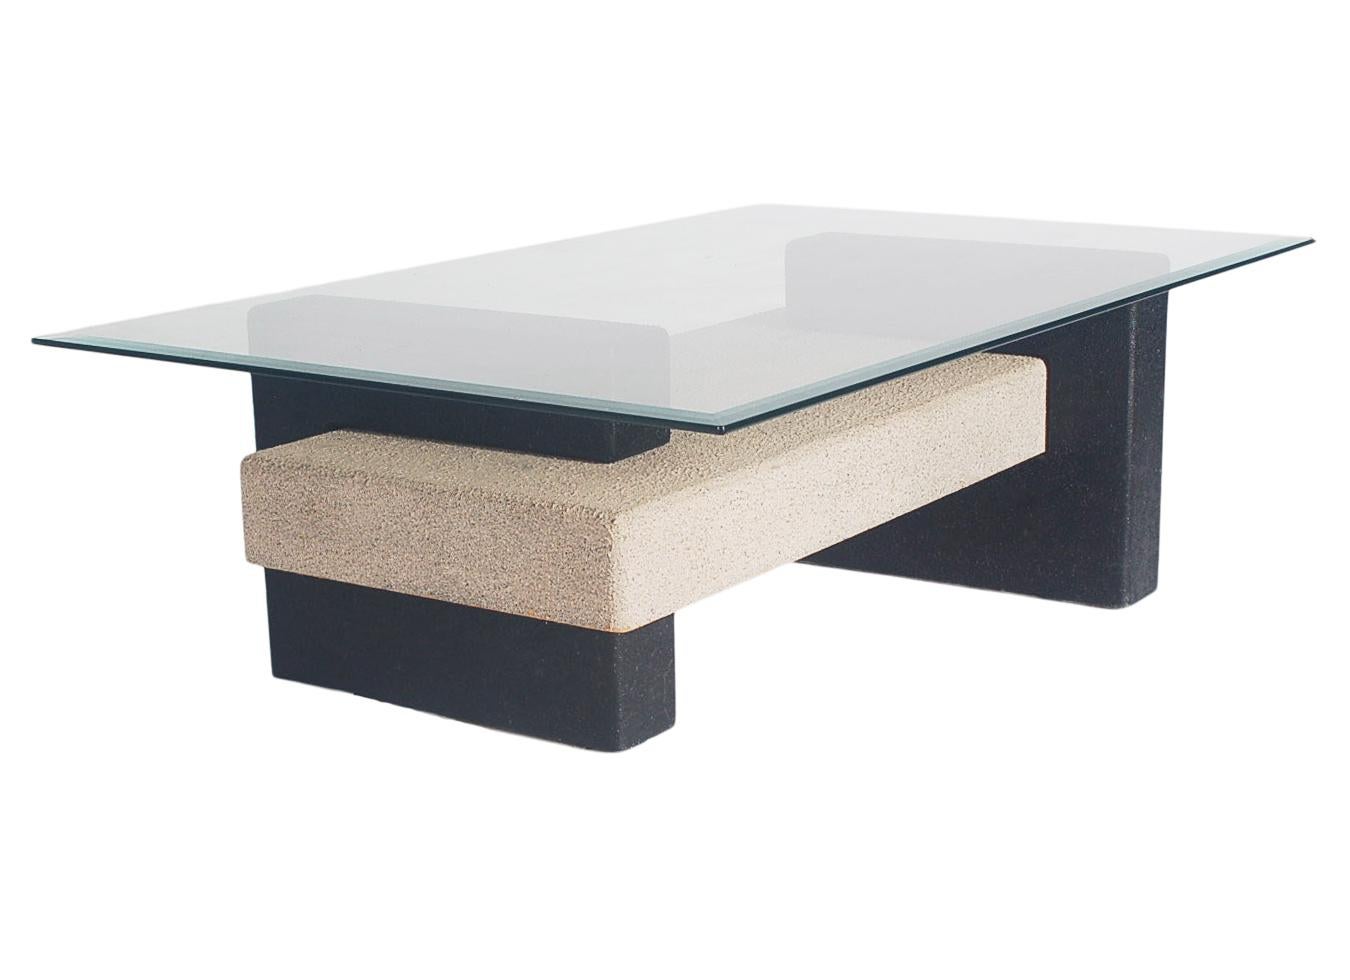 Late 20th Century Mid Century Italian Post Modern Rectangular Glass Coffee Table in Black & Gray For Sale